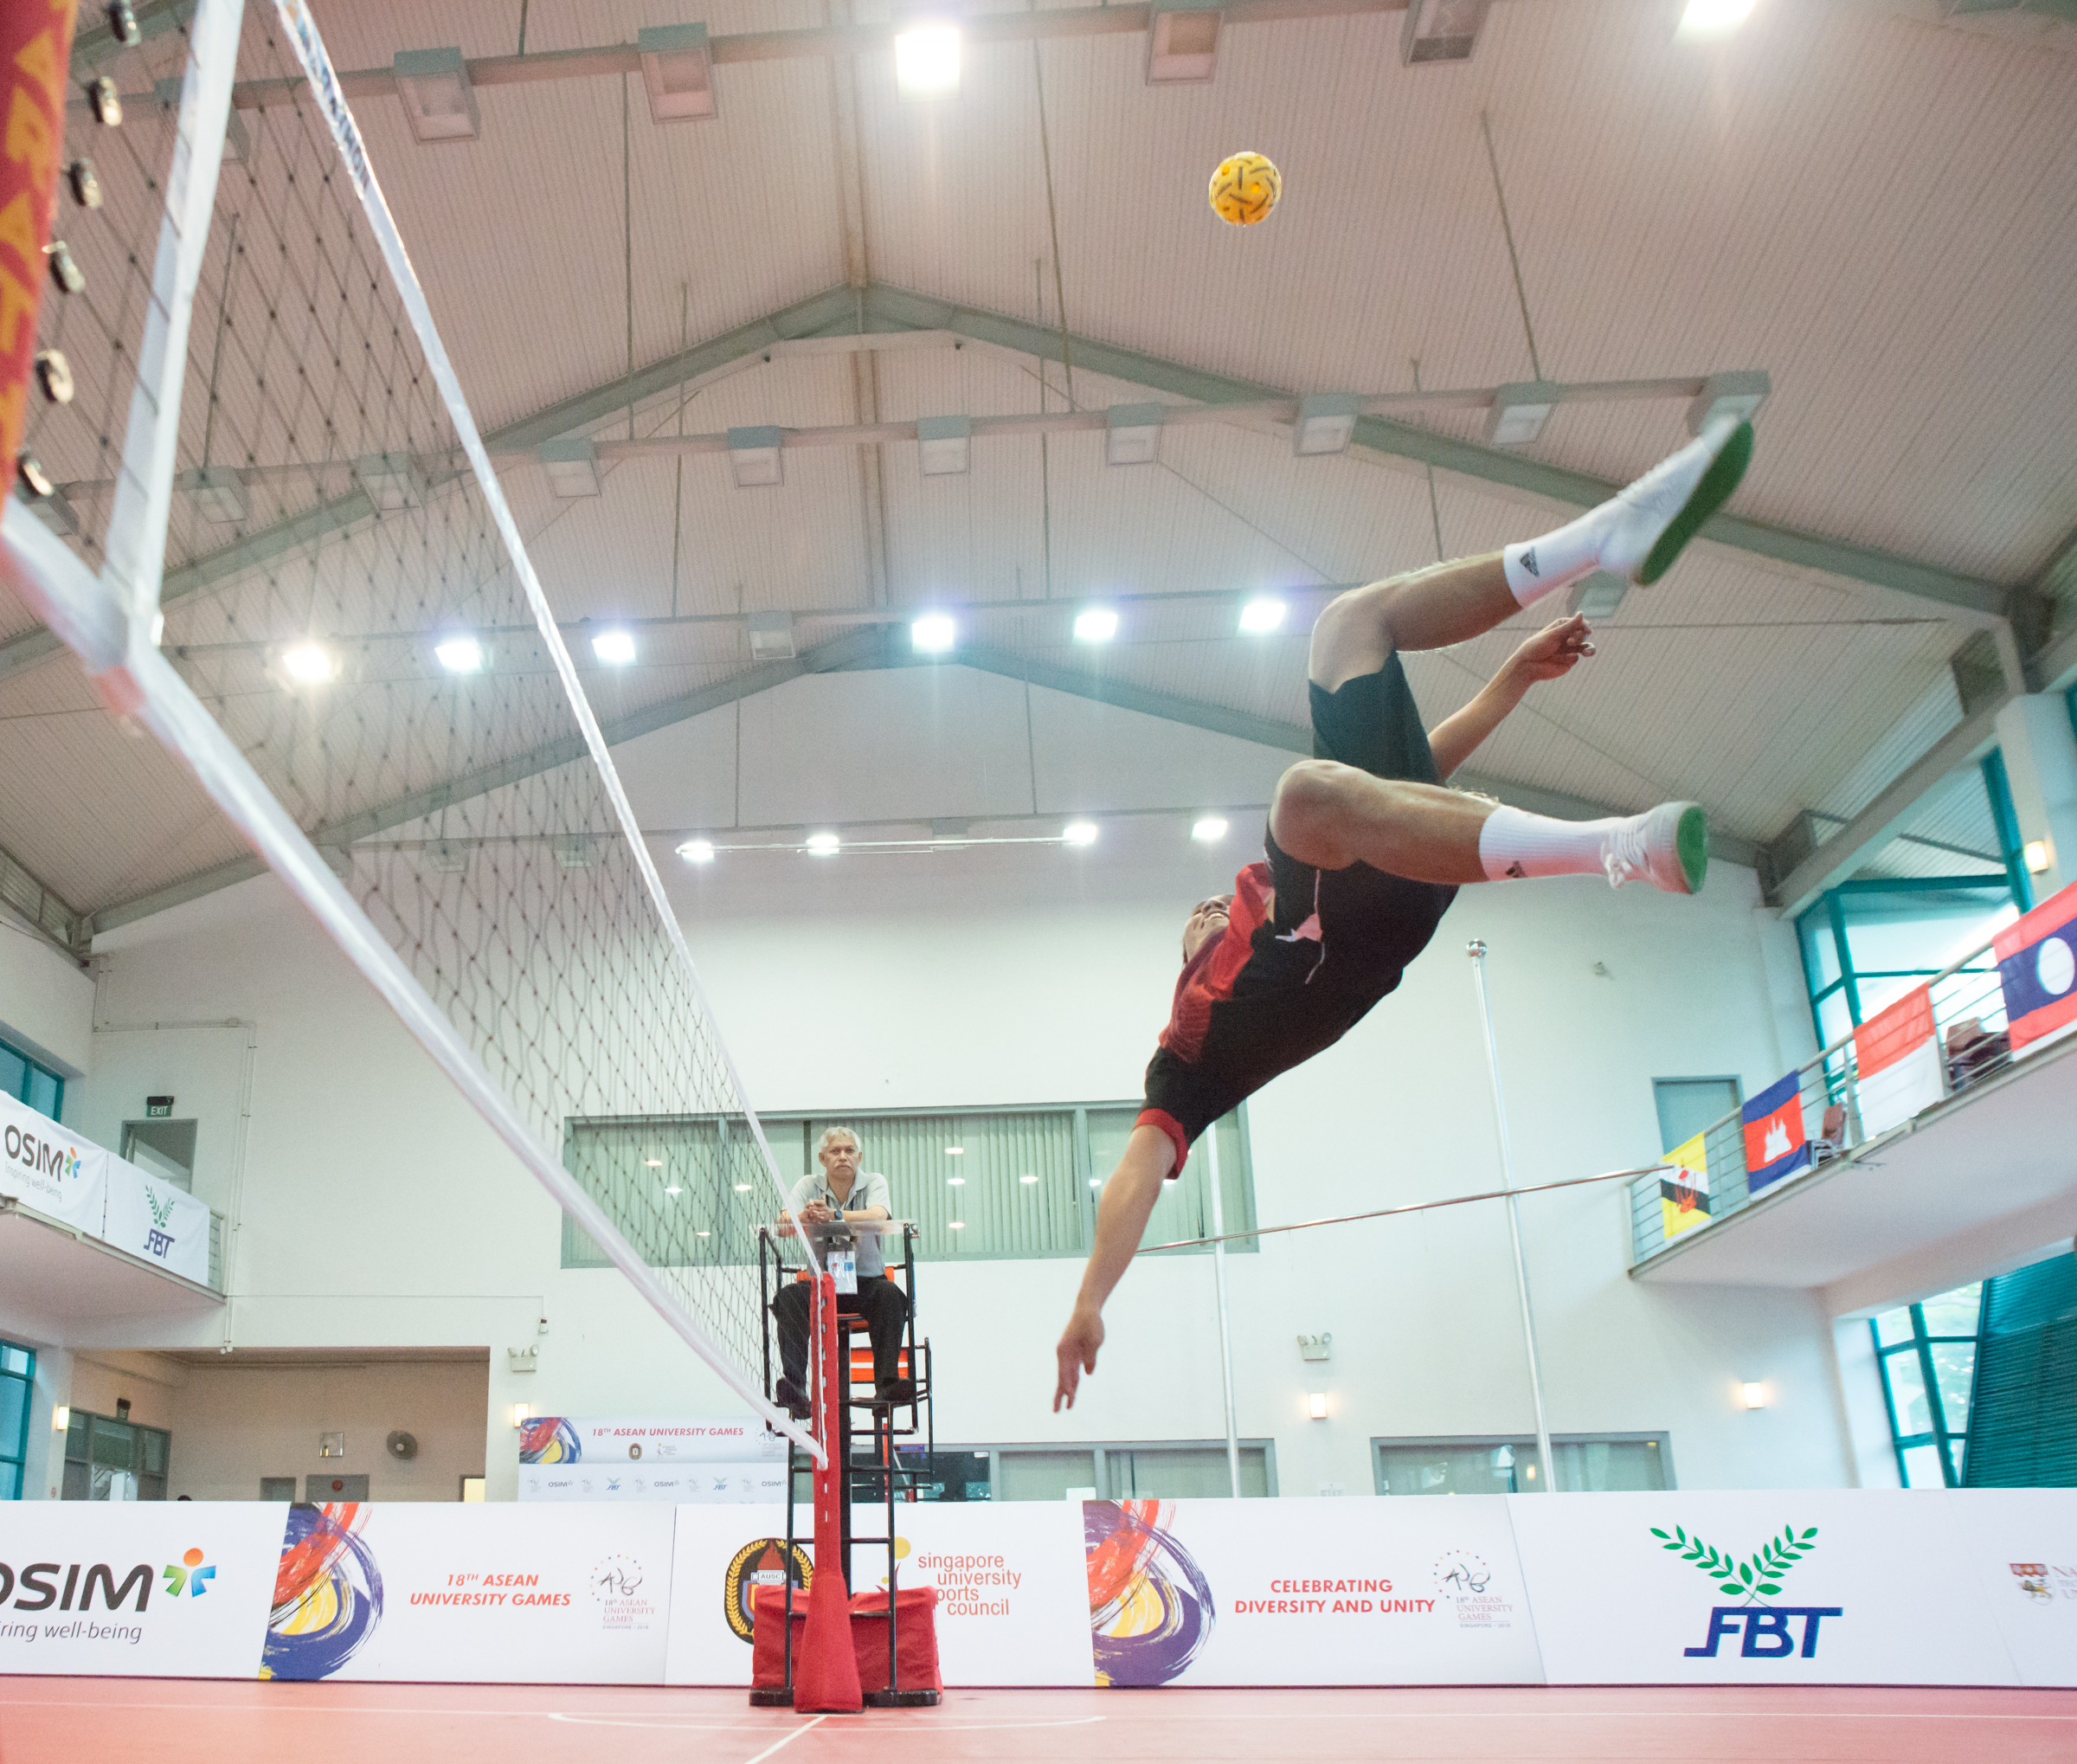 A Malaysian player prepares to kick the ball during the sepak takraw competition of the ASEAN University Games at the Bedok Sports Hall.